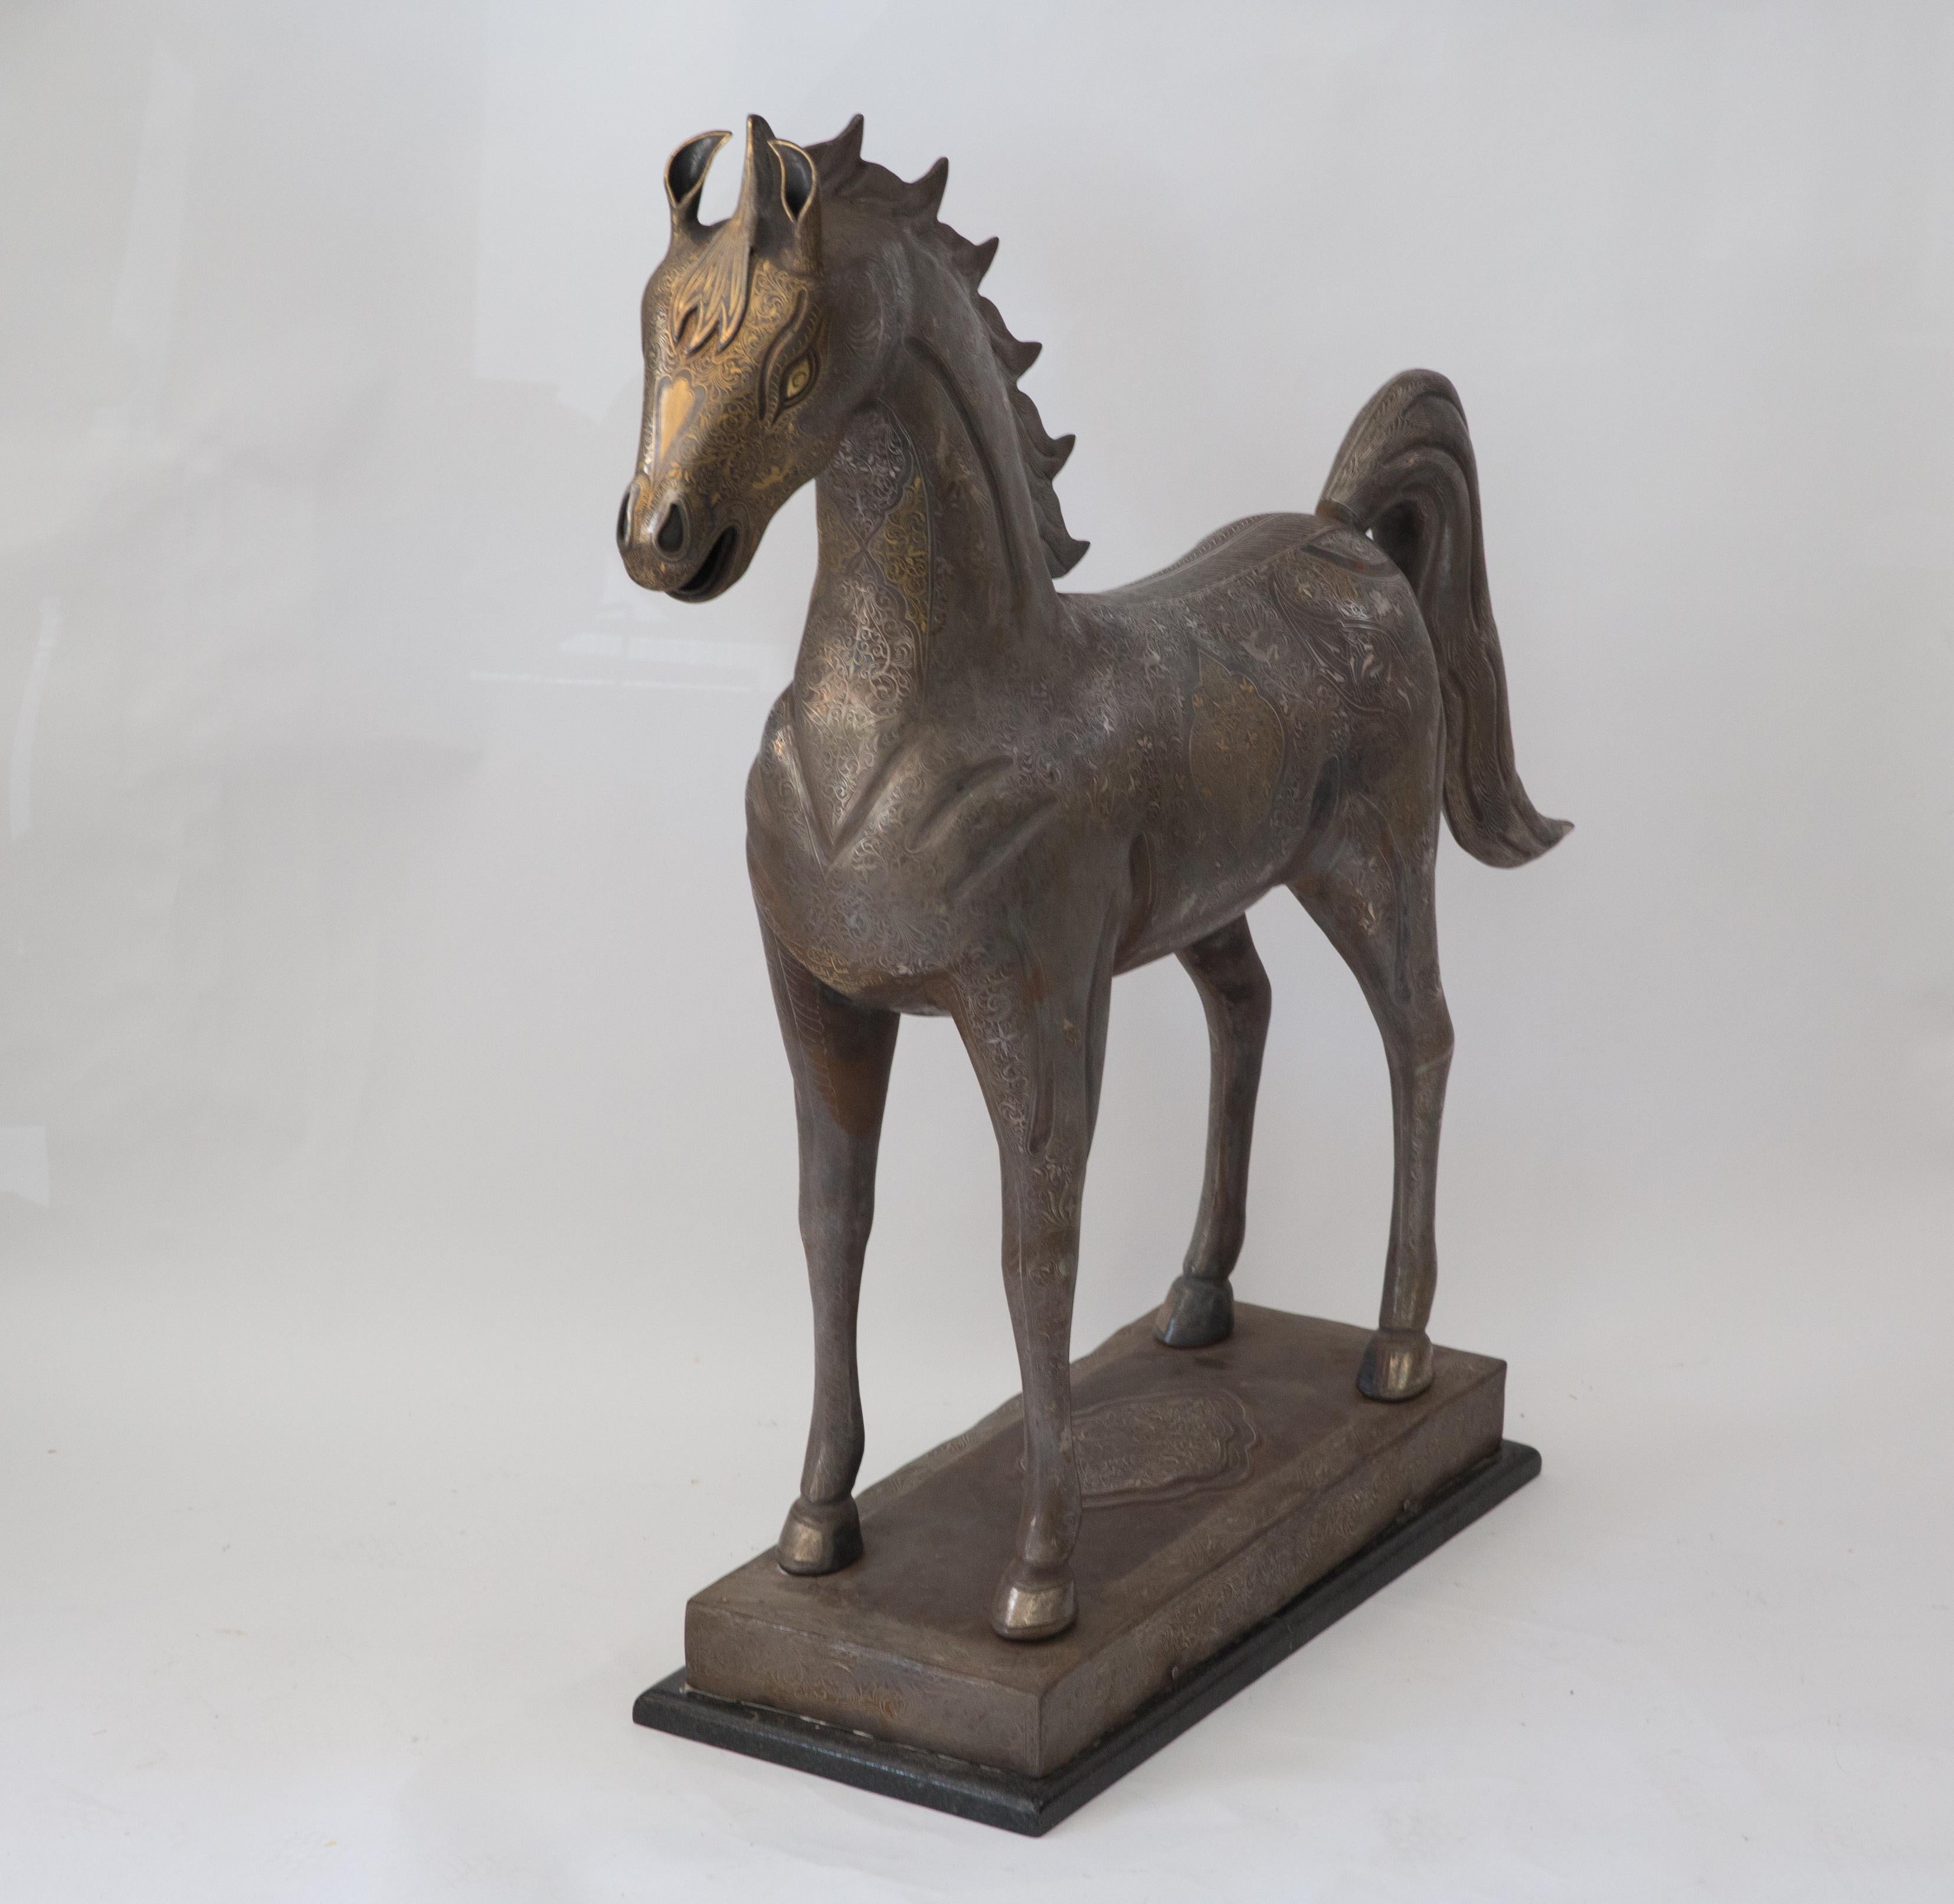 19th Century Monumental Exhibition Damascene Real Gold and Silver Inlaid Horse Sculpture